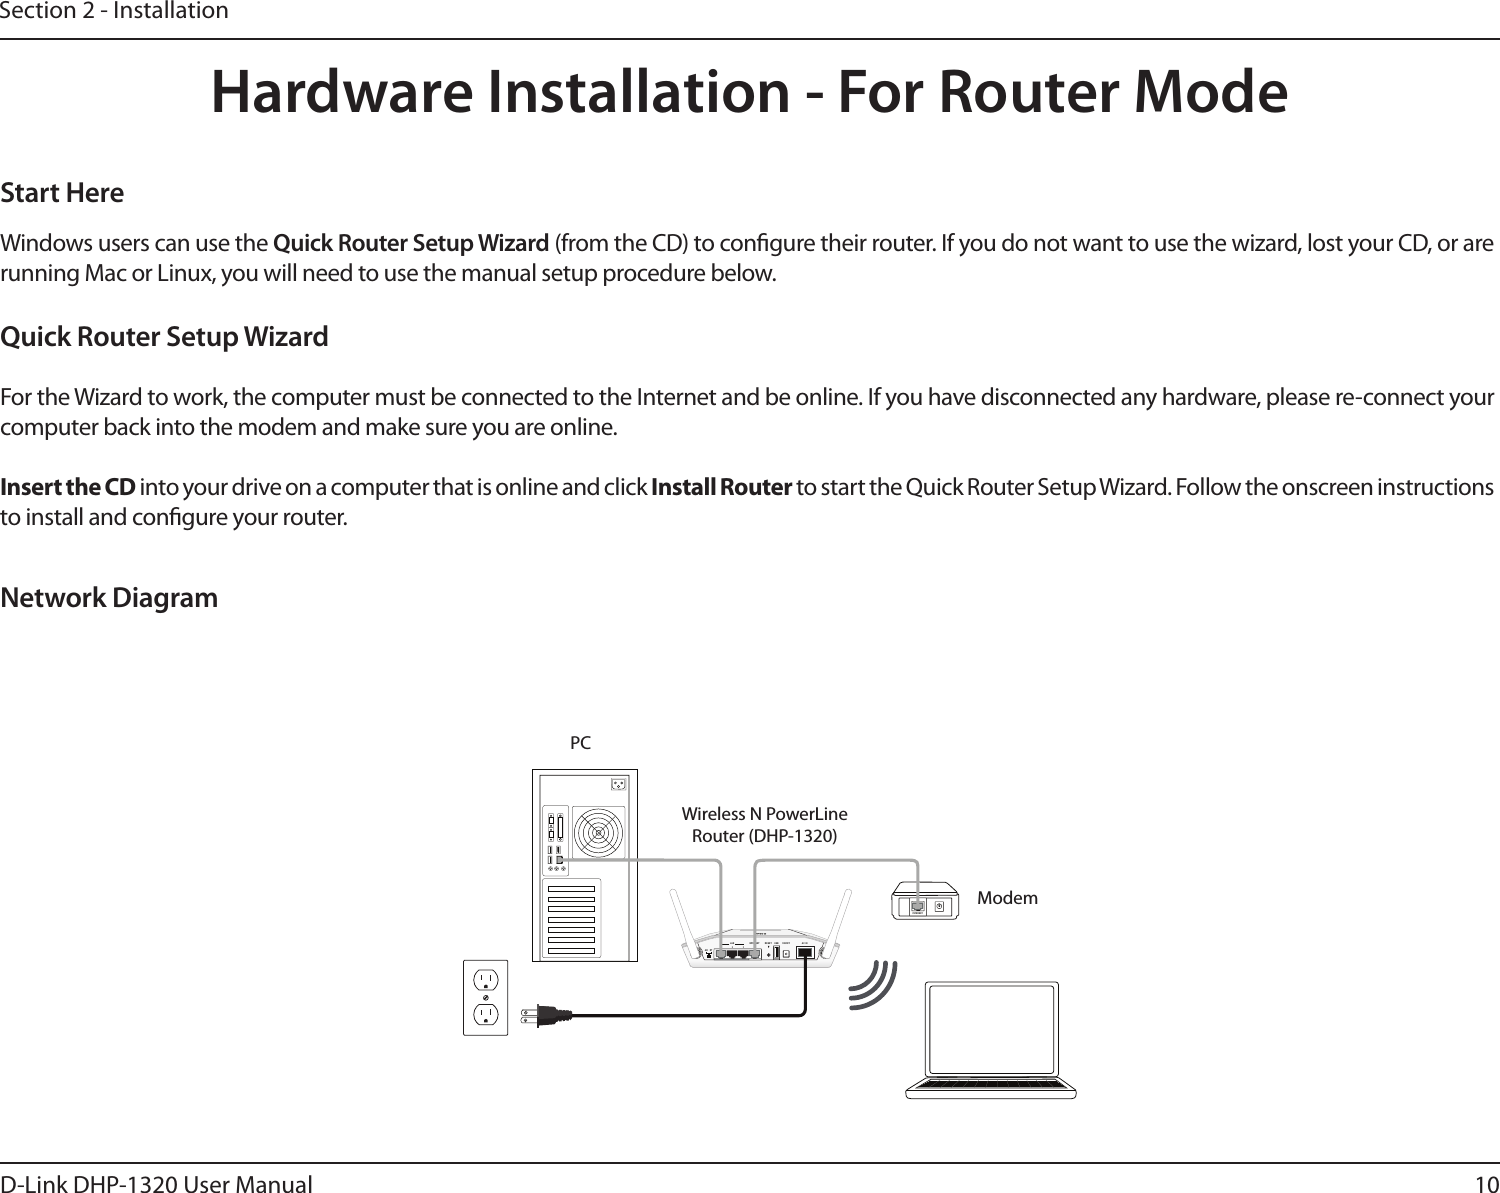 10D-Link DHP-1320 User ManualSection 2 - InstallationHardware Installation - For Router ModeNetwork DiagramWindows users can use the Quick Router Setup Wizard (from the CD) to congure their router. If you do not want to use the wizard, lost your CD, or are running Mac or Linux, you will need to use the manual setup procedure below. Start HereQuick Router Setup WizardFor the Wizard to work, the computer must be connected to the Internet and be online. If you have disconnected any hardware, please re-connect your computer back into the modem and make sure you are online.Insert the CD into your drive on a computer that is online and click Install Router to start the Quick Router Setup Wizard. Follow the onscreen instructions to install and congure your router. Wireless N PowerLine Router (DHP-1320)Modem5V- - - 3A1 2 LAN 3 4 INTERNET USBRESETINTERNET1 2 3INTERNETLANAR RTUSBRESET ON/OFF AC IN1 2 3INTERNETLANAR RTUSBRESET ON/OFF AC ININTERNETPC